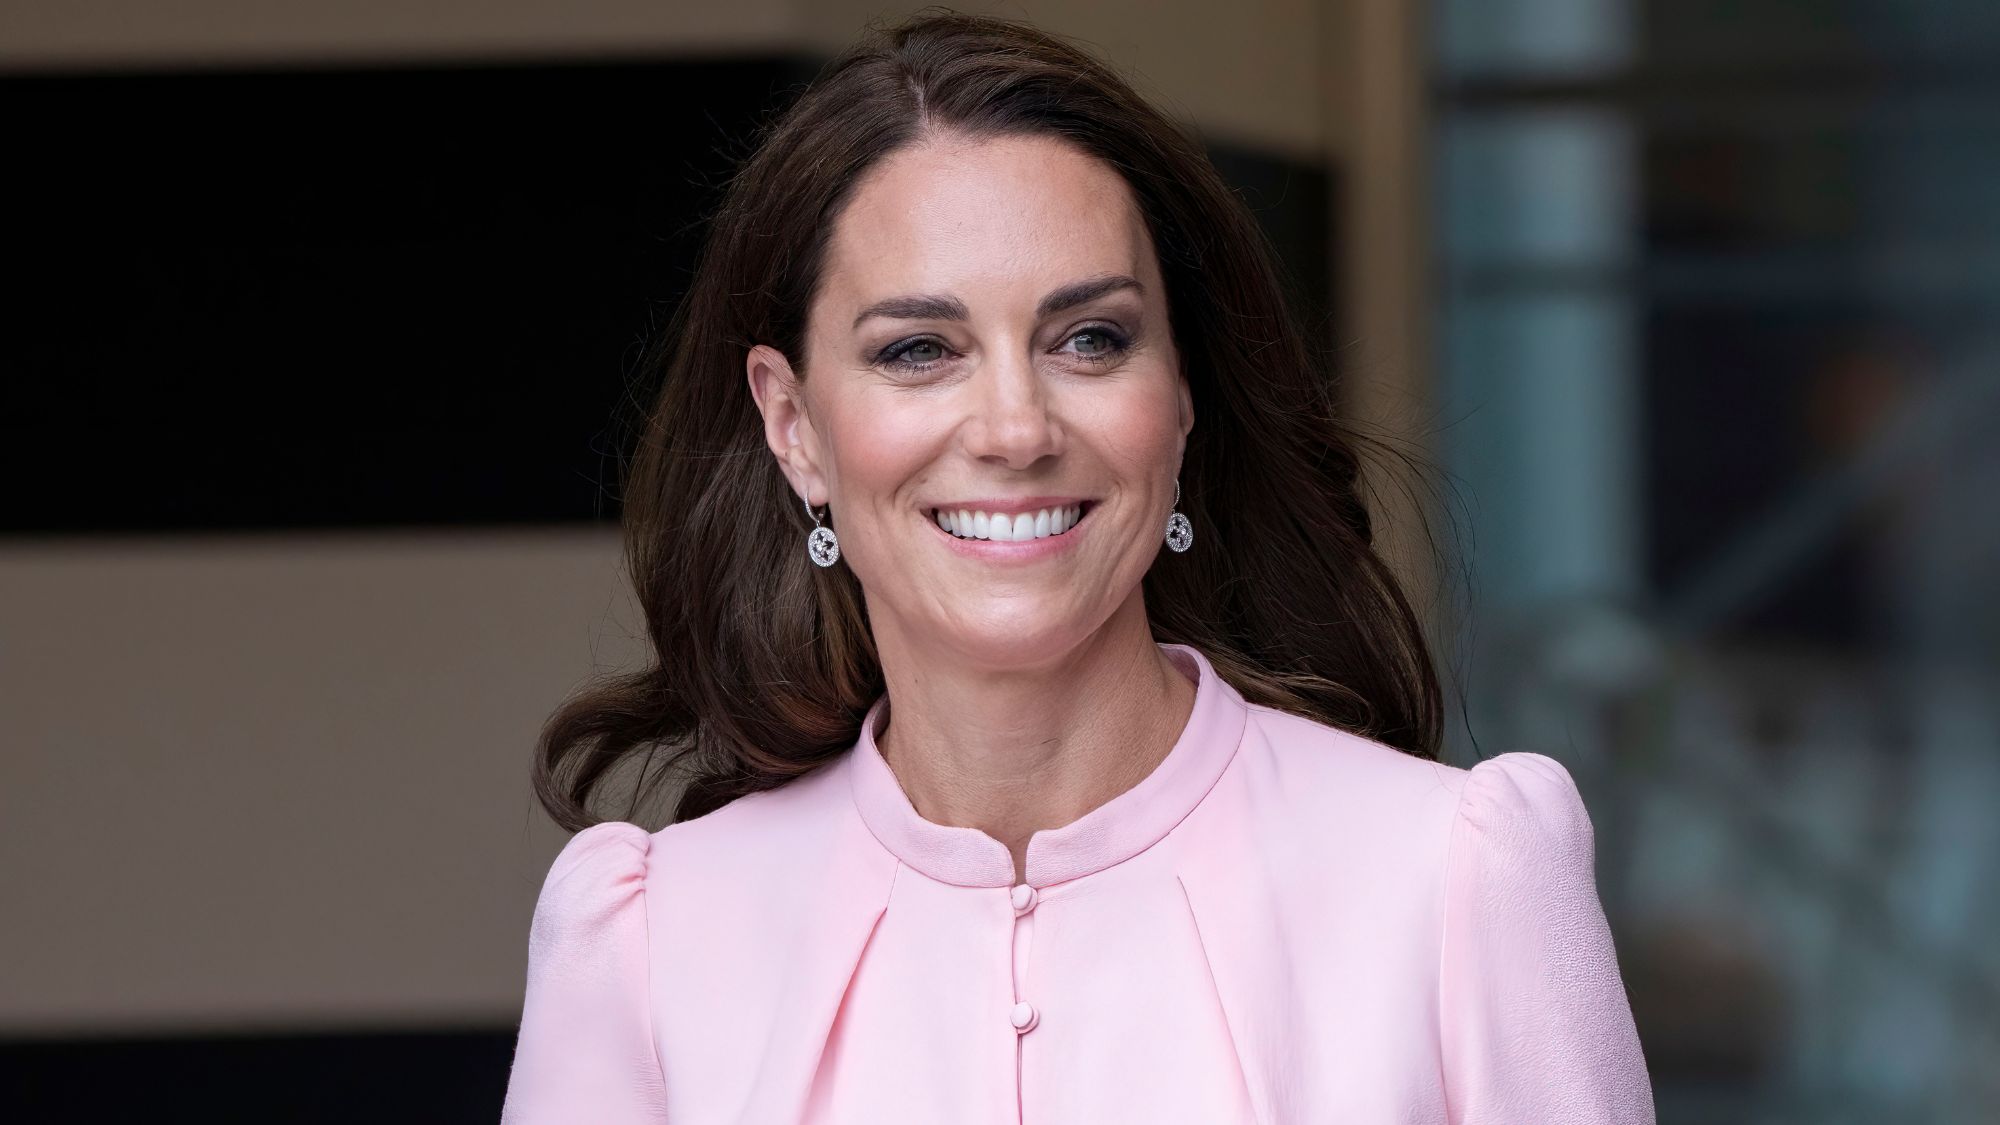 Kate Middleton's Strathberry Multrees Chain Wallet in Black